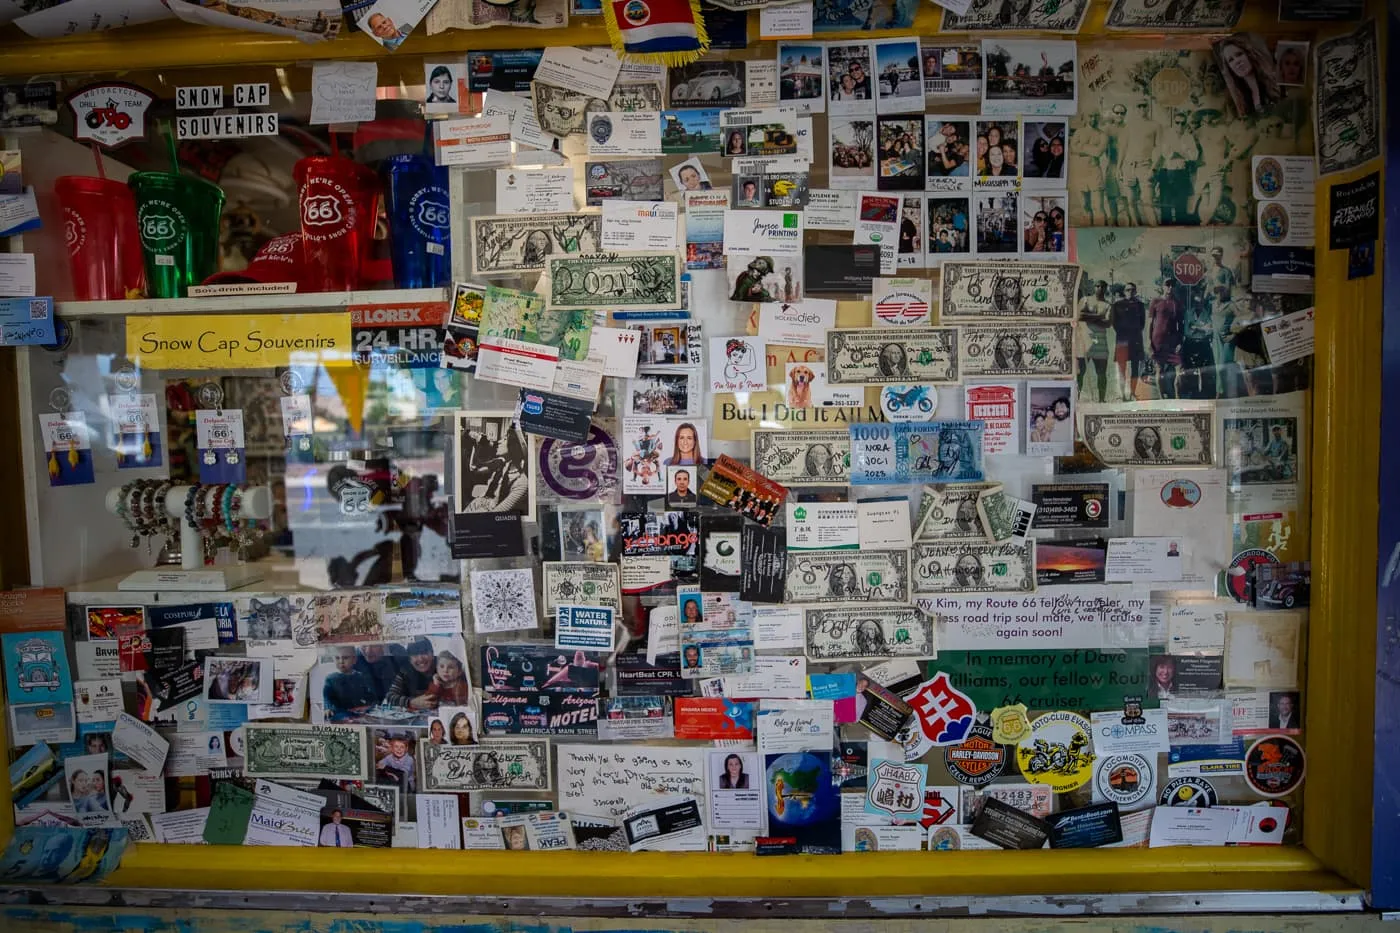 Walls covered with notes and money inside Delgadillo’s Snow Cap in Seligman, Arizona - Route 66 restaurant and Drive-In Diner